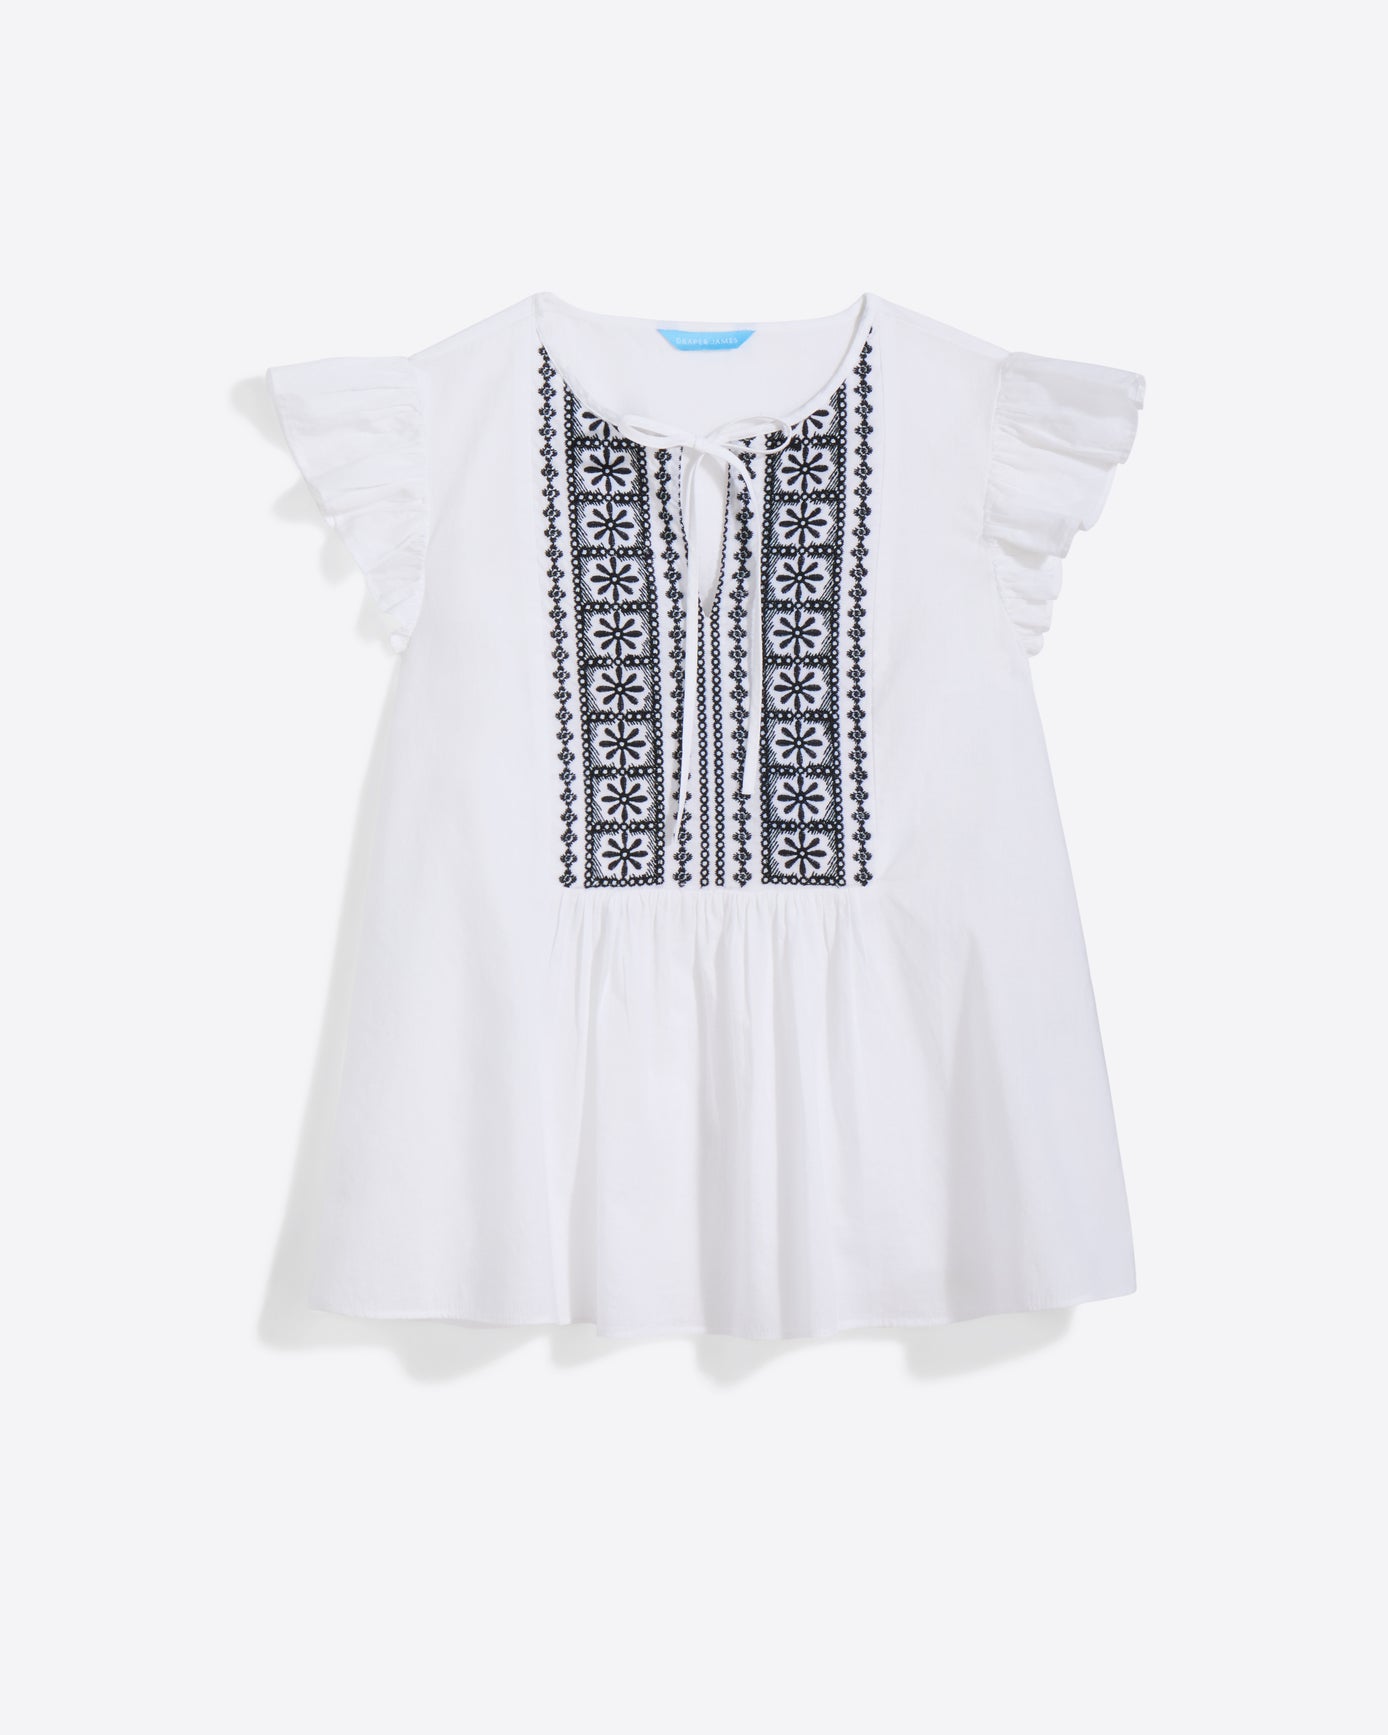 Ana Top in Embroidered Cotton